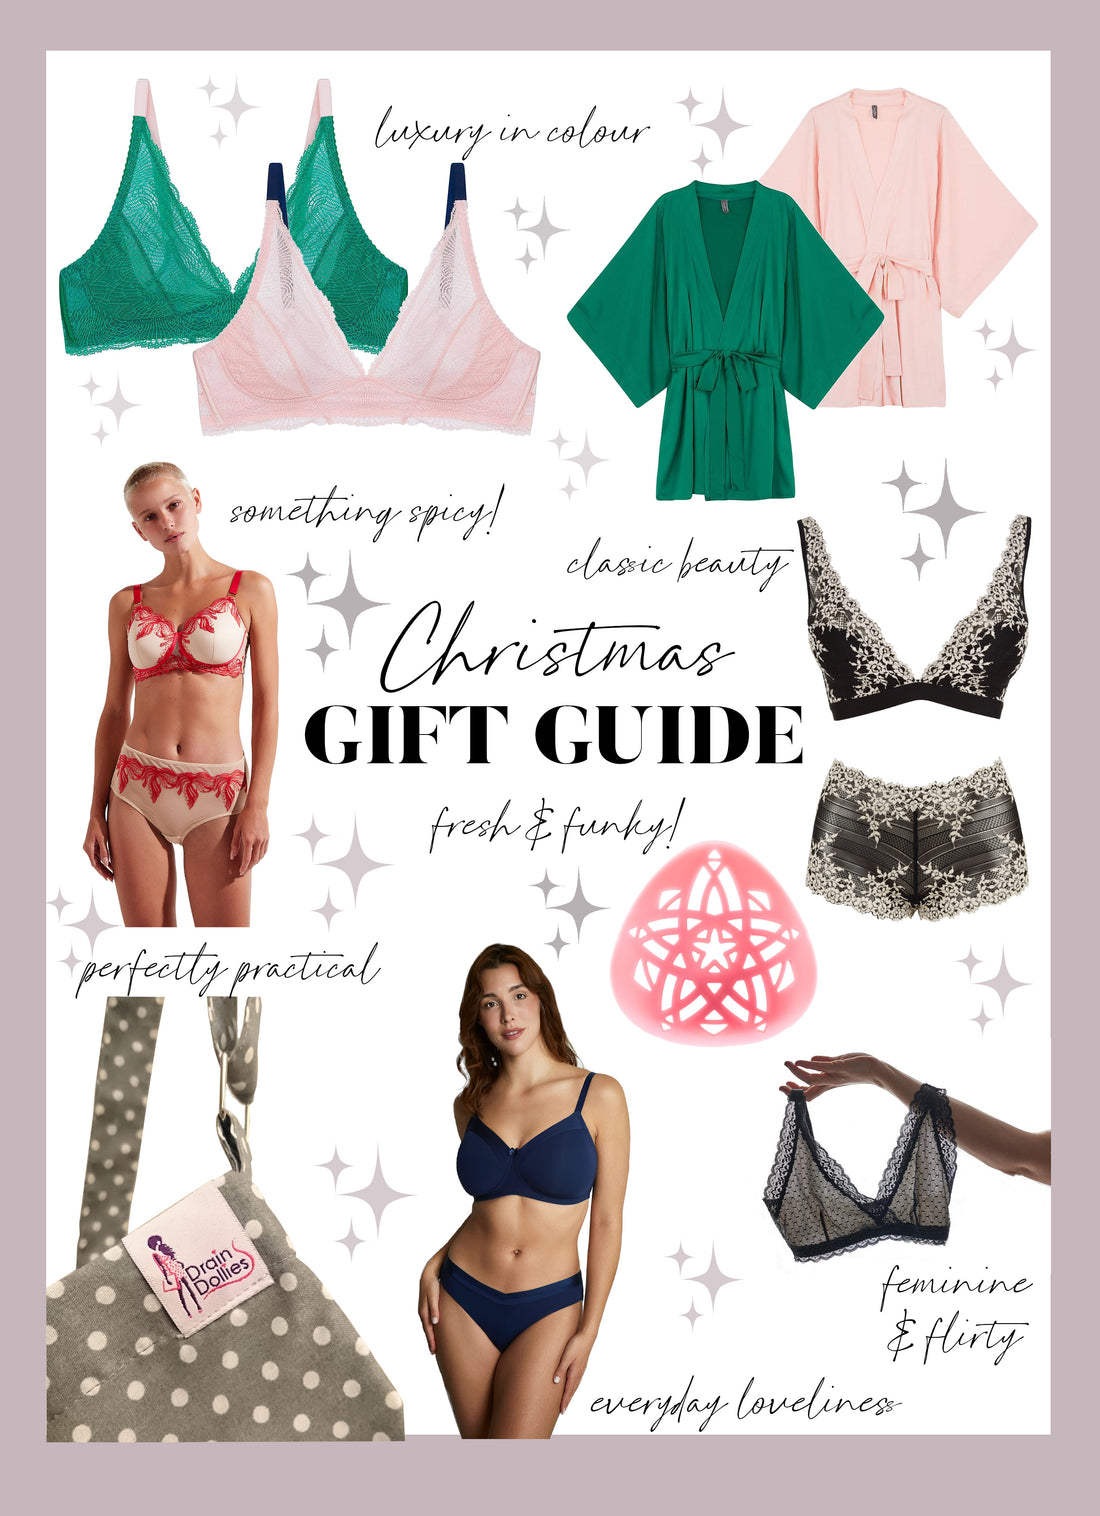 Our Christmas Gift Guide is here! x the Bra Sisters – The Bra Sisters